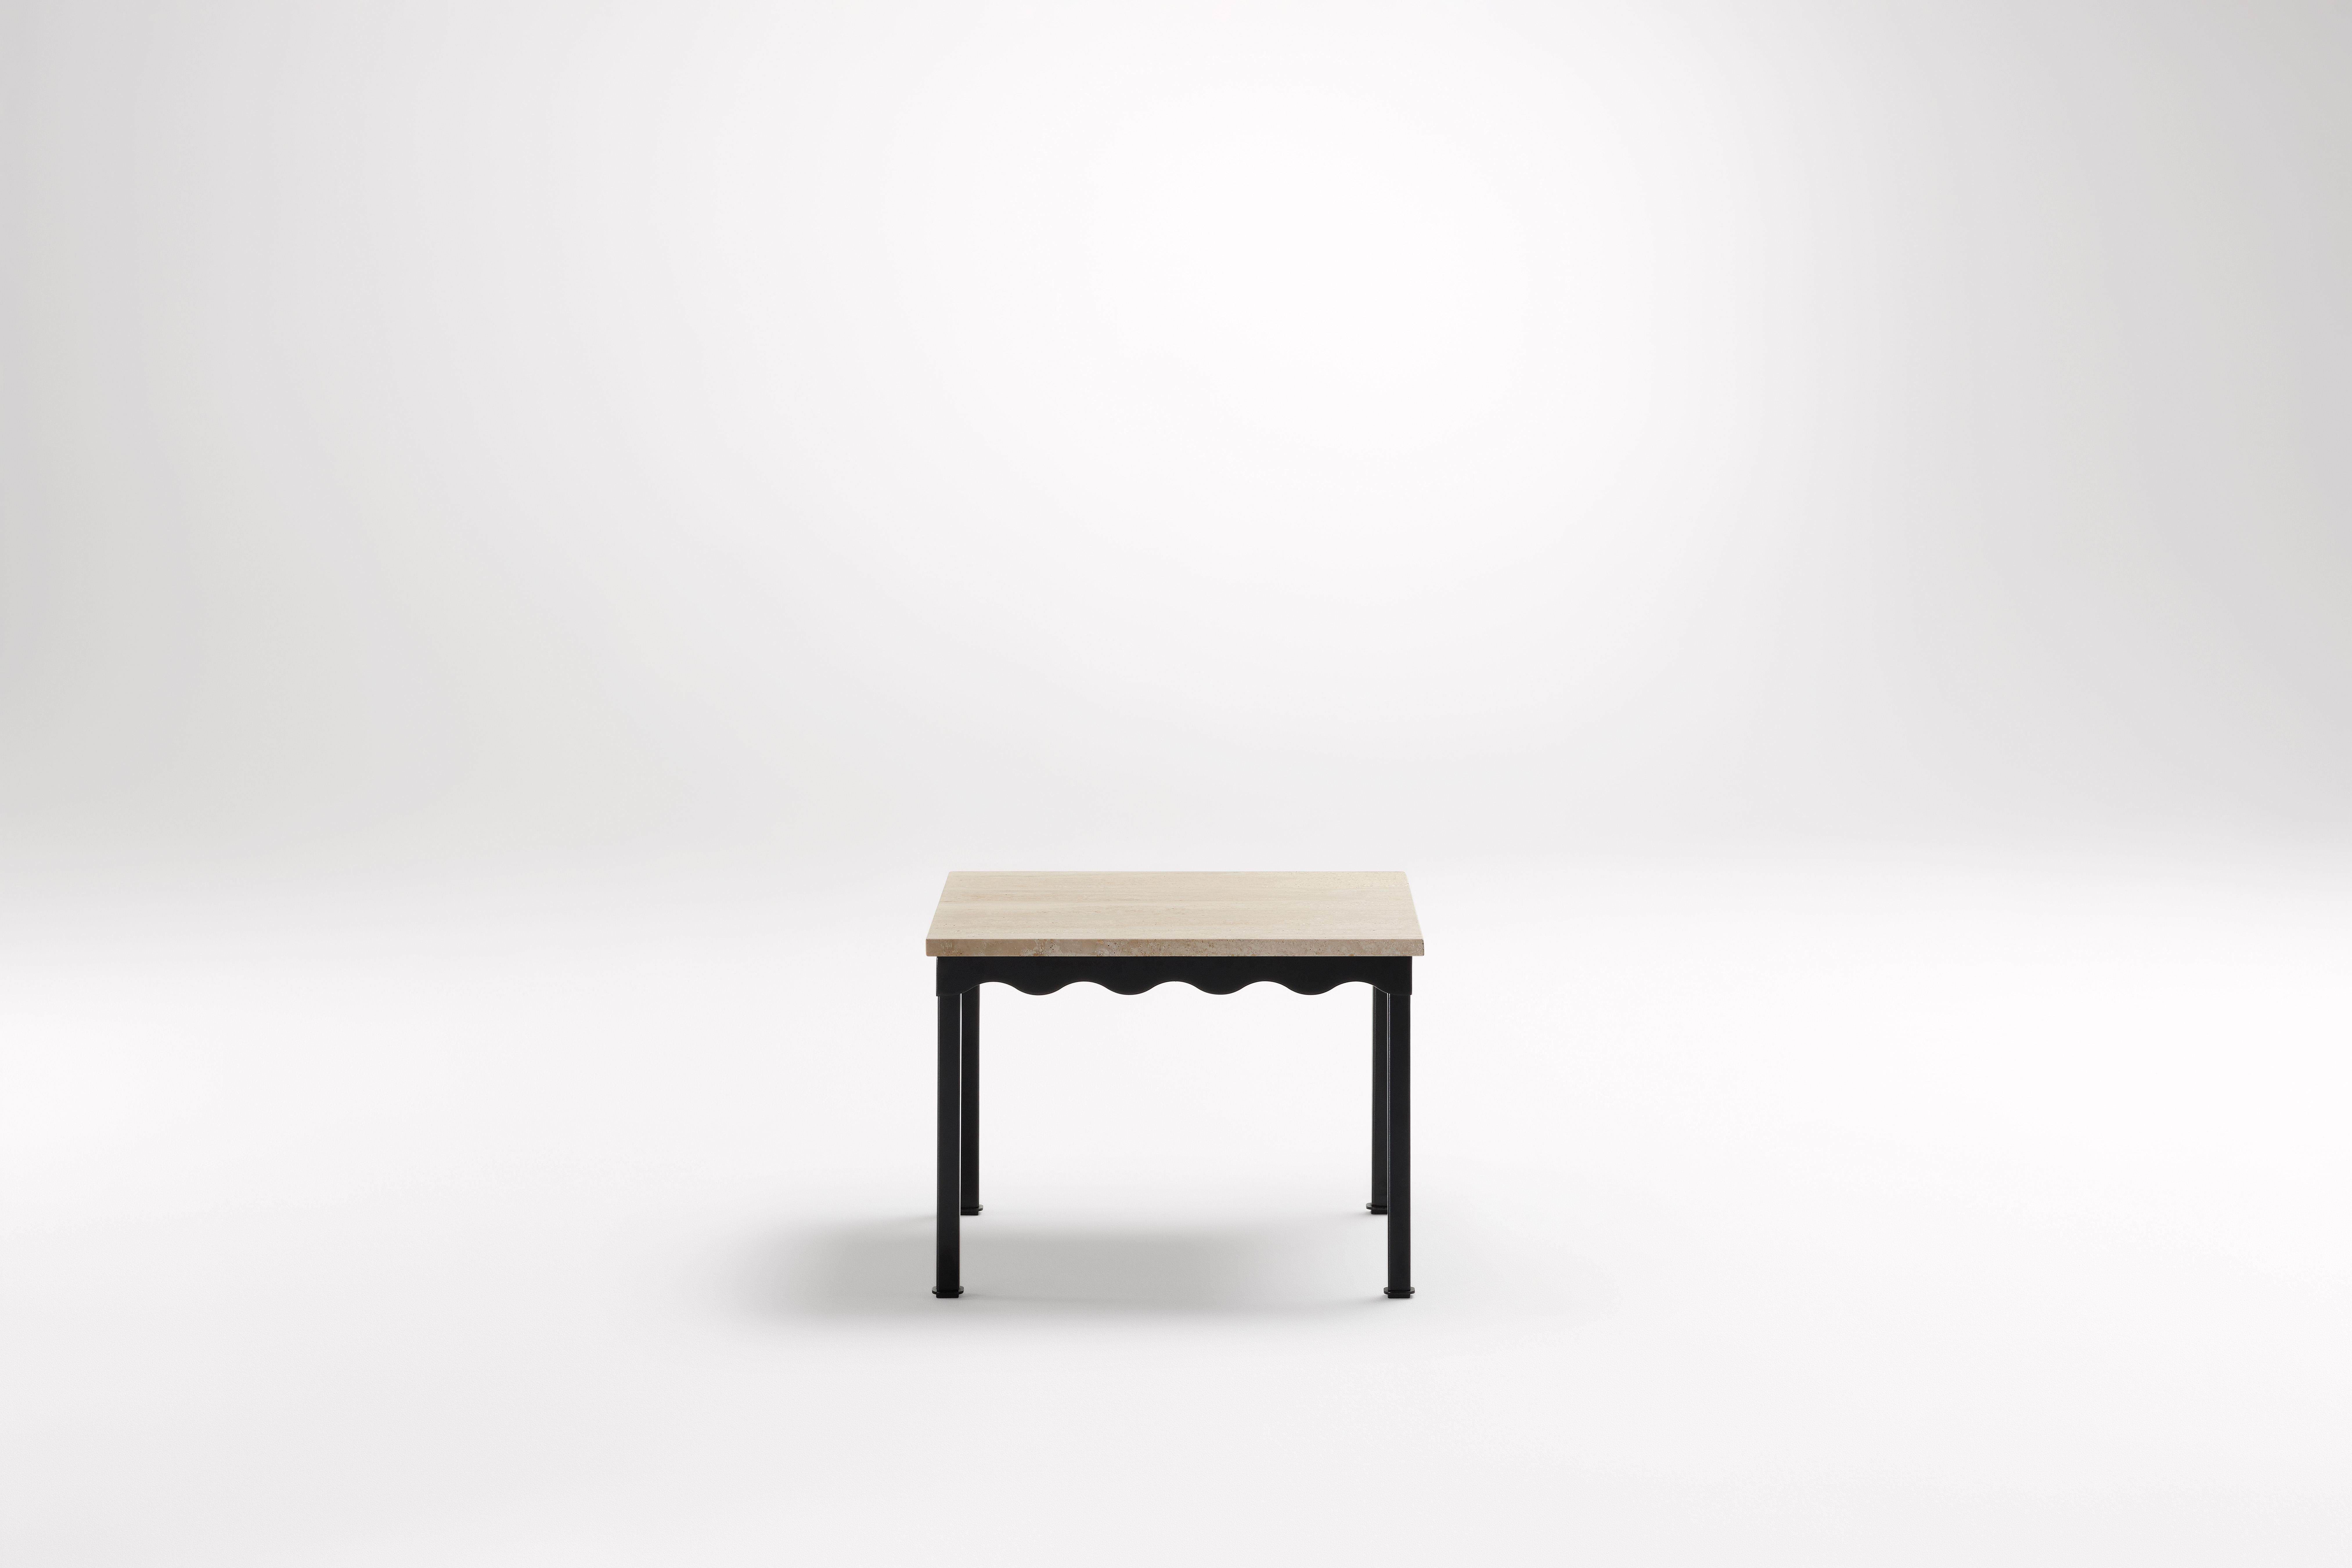 Travertine Bellini Side Table by Coco Flip
Dimensions: D 54 x W 54 x H 39 cm
Materials: Stone top, Powder-coated steel frame. 
Weight: 12 kg


Coco Flip is a Melbourne based furniture and lighting design studio, run by us, Kate Stokes and Haslett